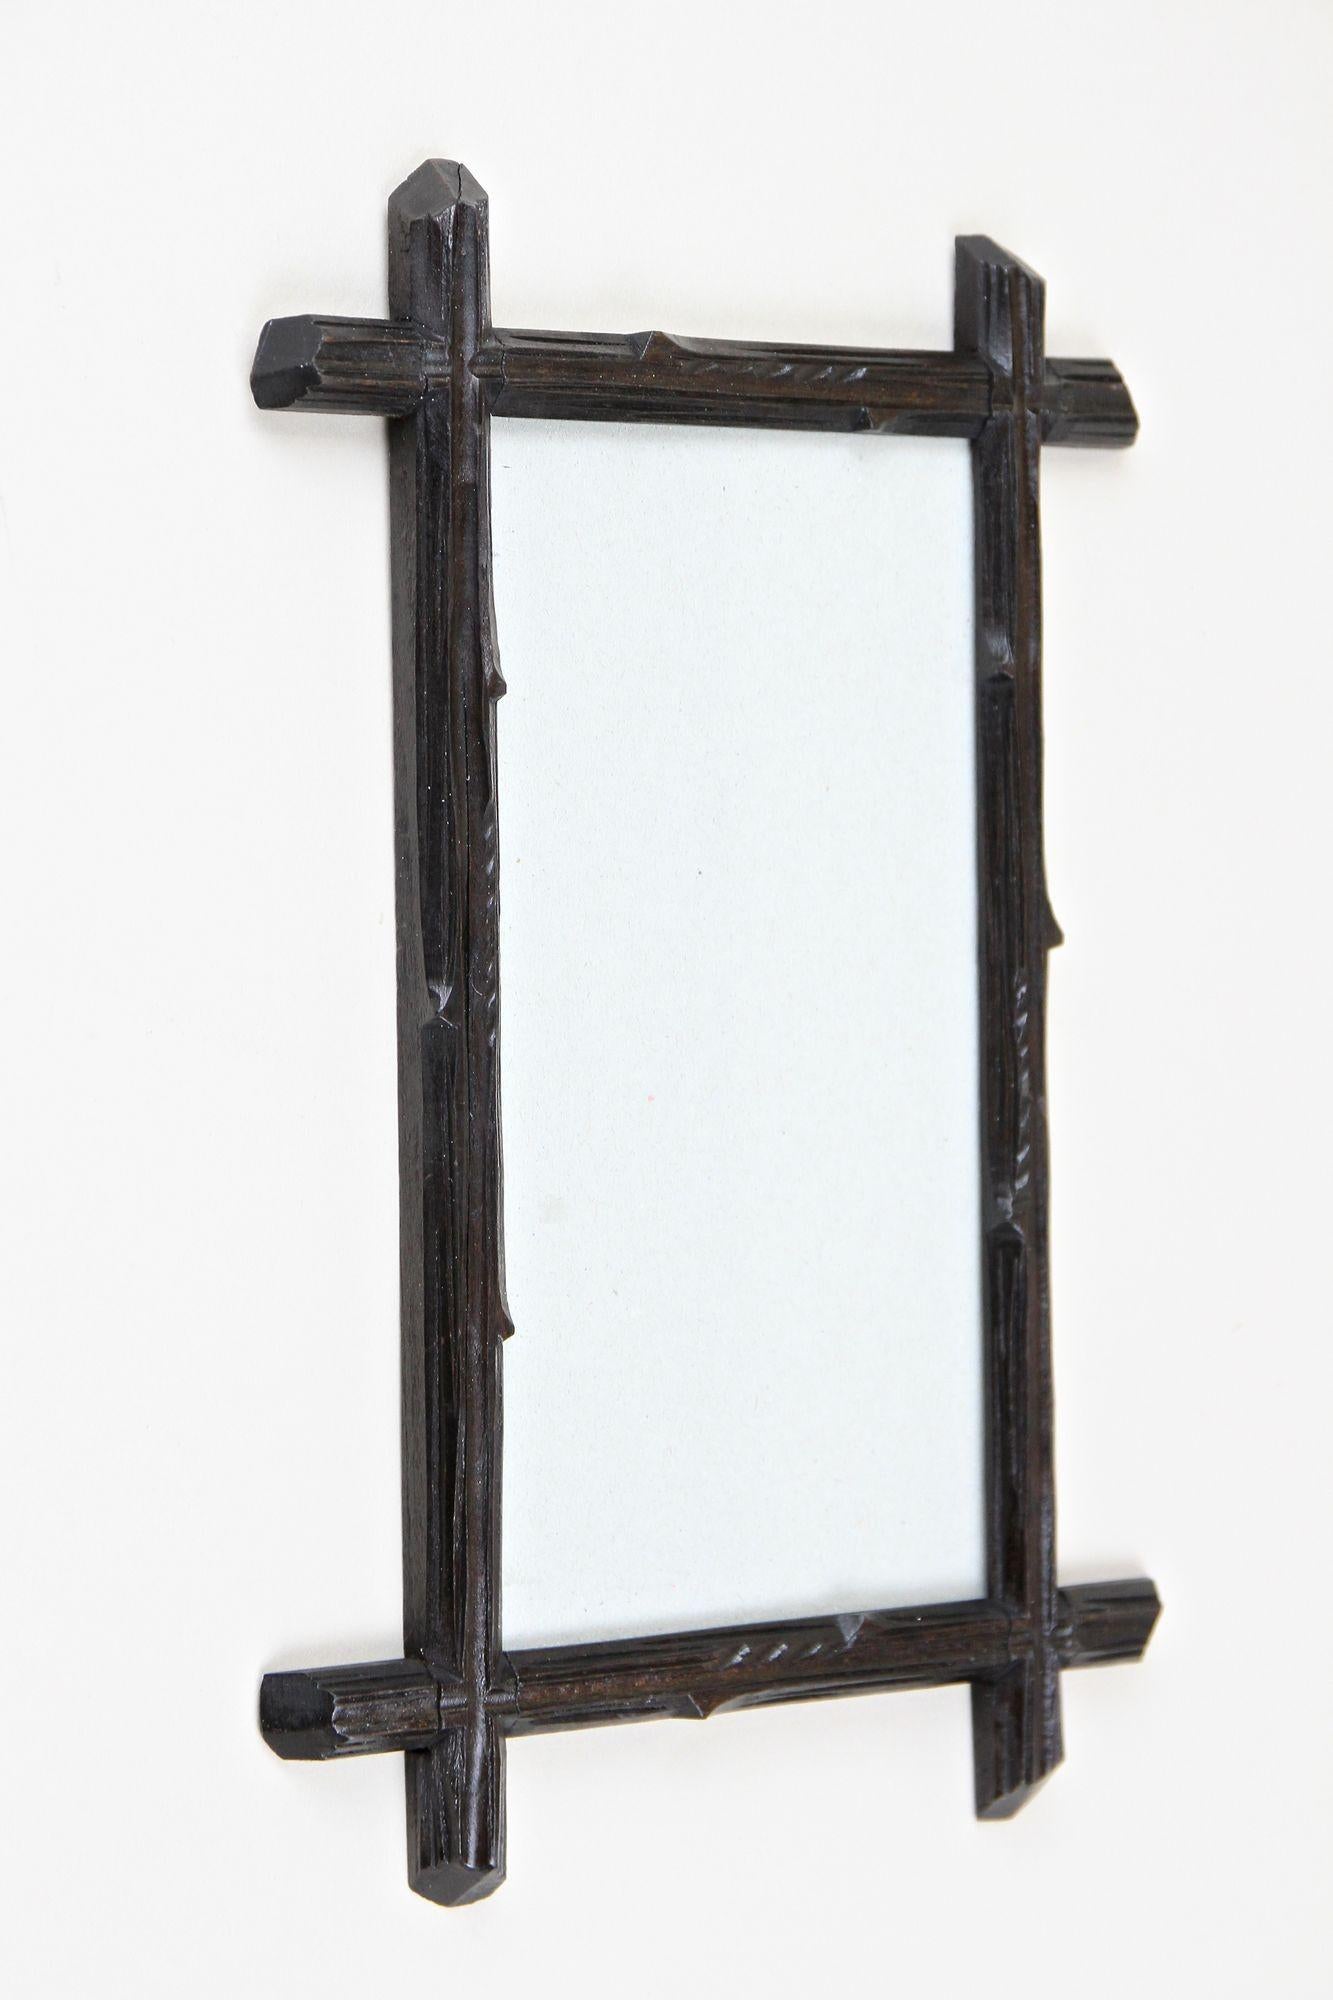 Lovely rustic black Forest photo frame from the late 19th century, around 1880 in Austria. Elaborately hand carved out of bass wood this antique photo frame shows a charming traditional tree trunk design which the dark brown almost black stained